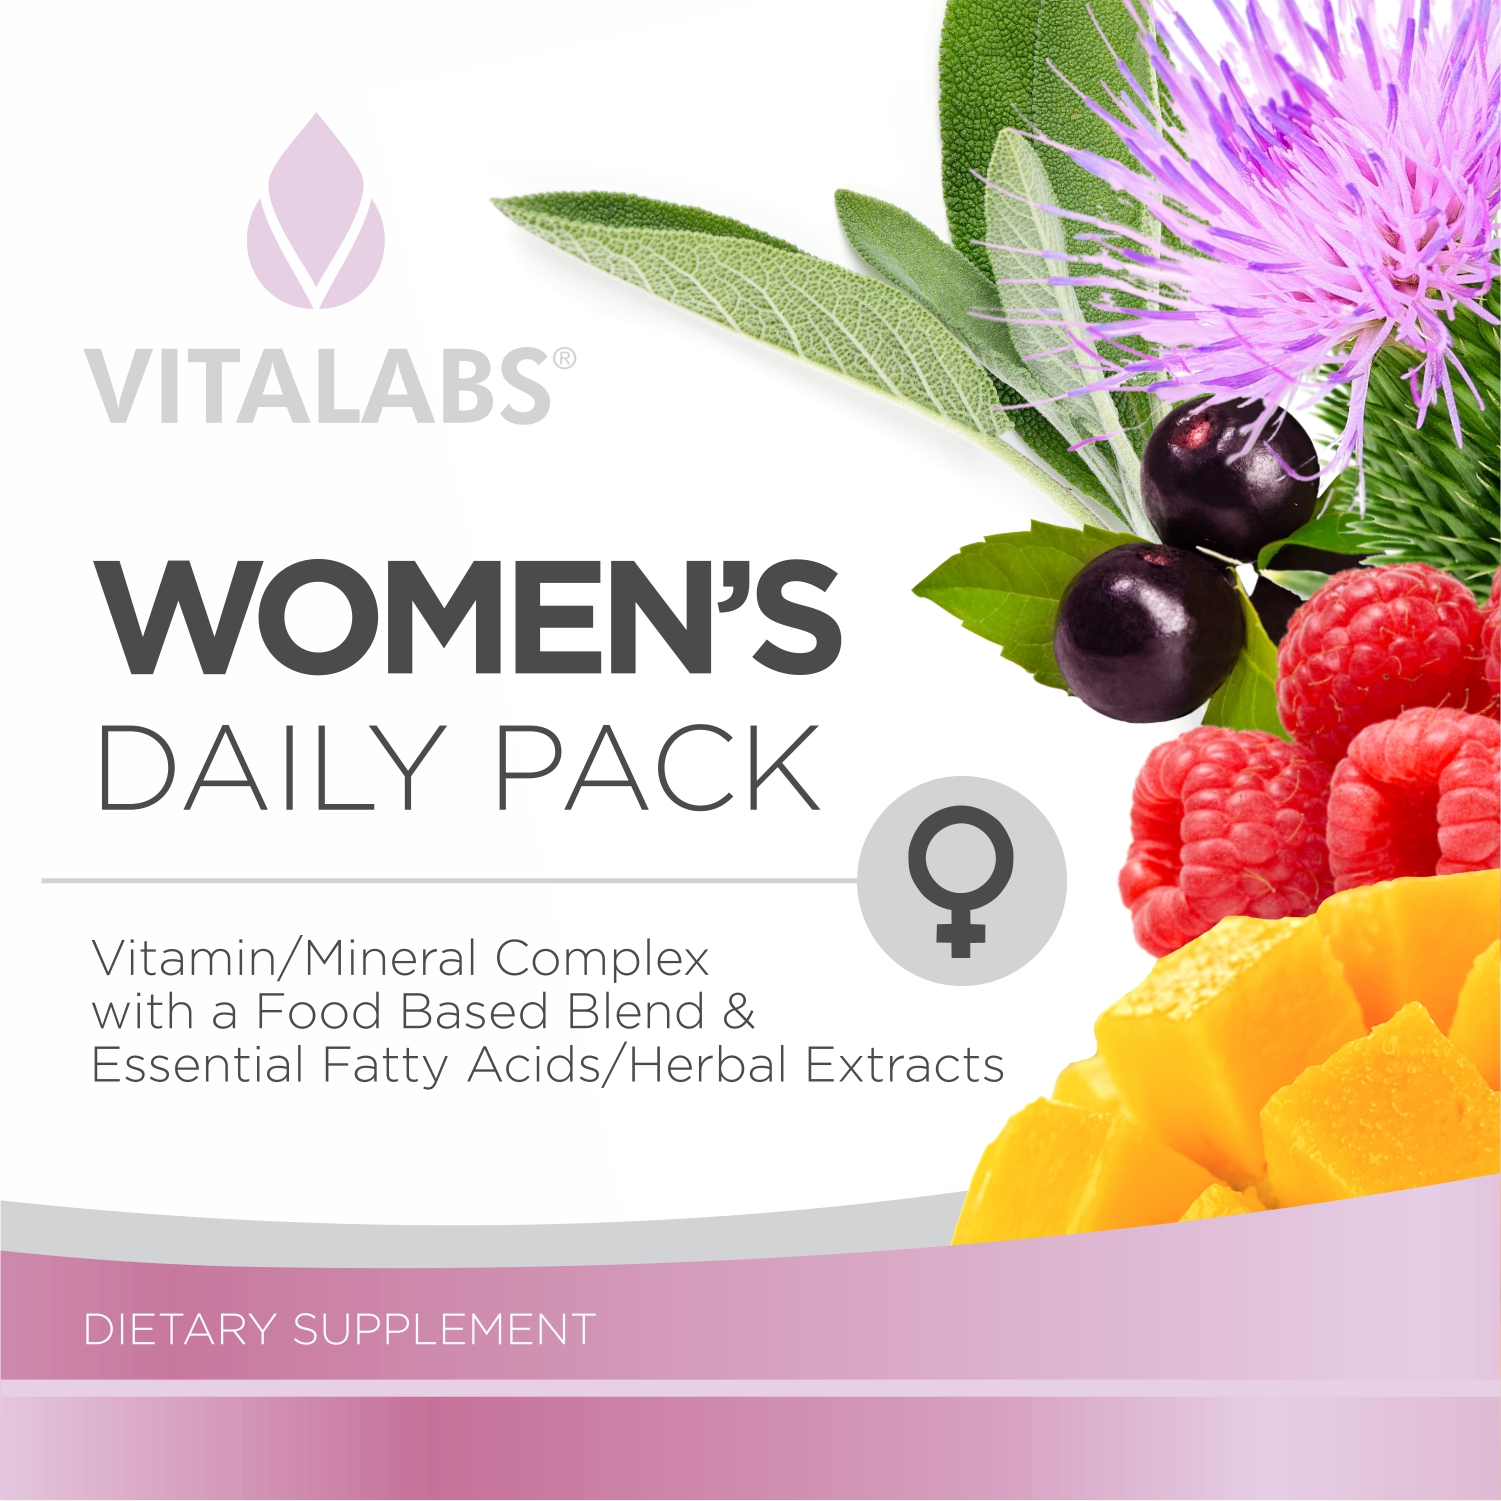 Private Label Women's Daily Pack